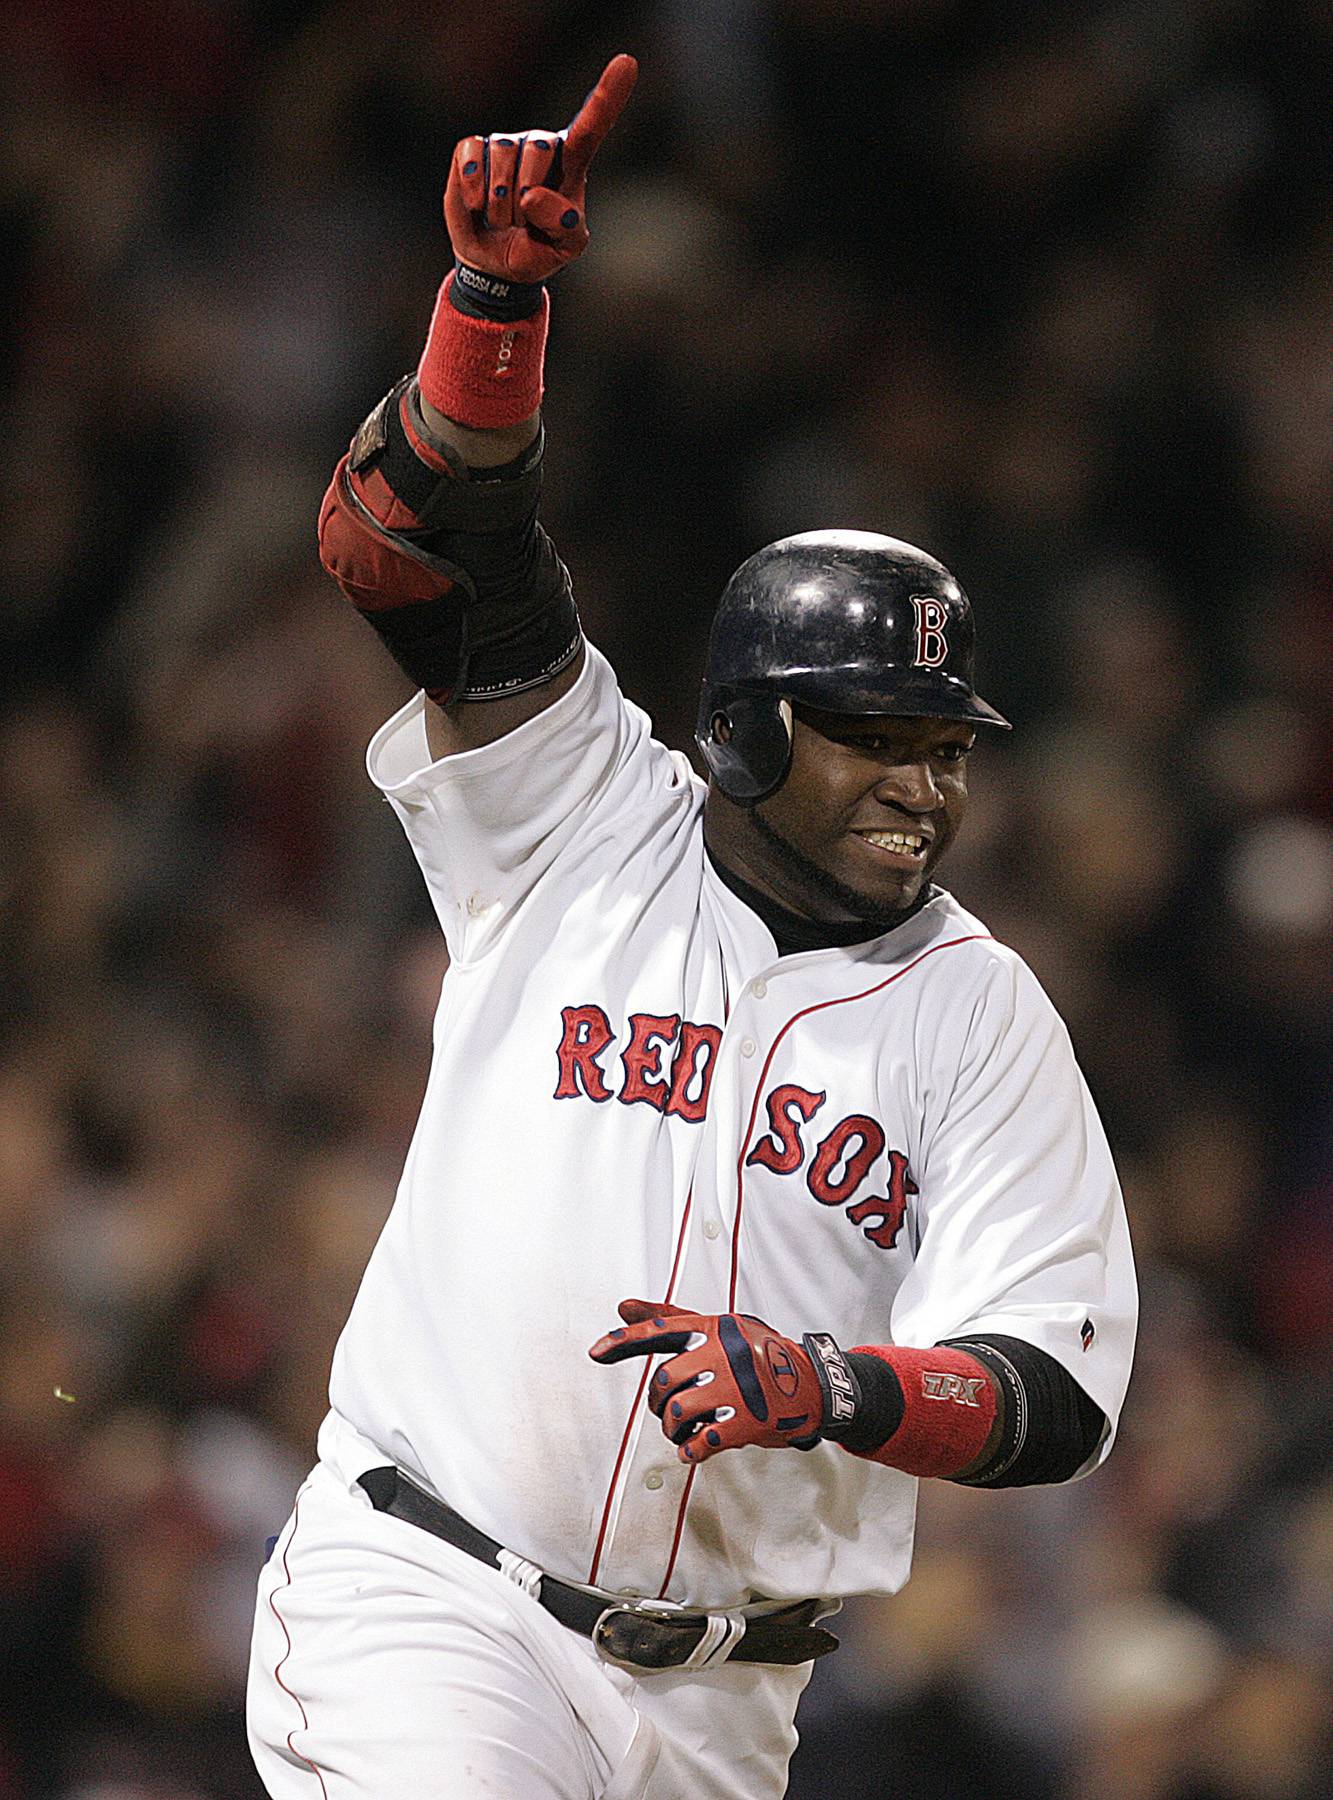 Big Papi and the 1 from Hot Papi: David Ortiz Is Three for 10